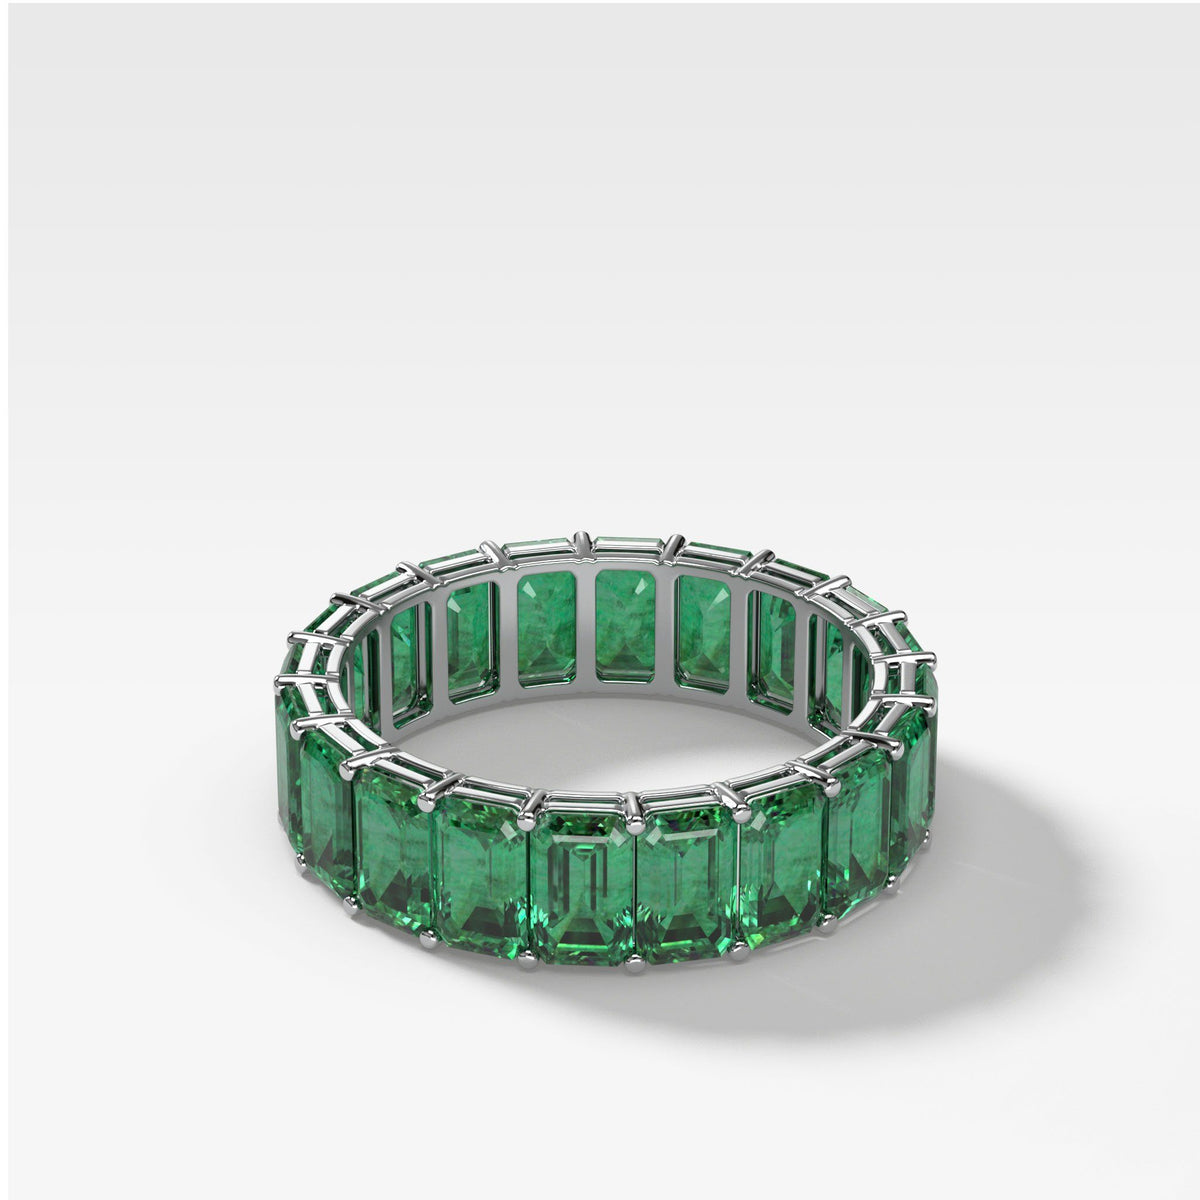 Green Emerald Emerald Cut Eternity band by Good Stone in White Gold